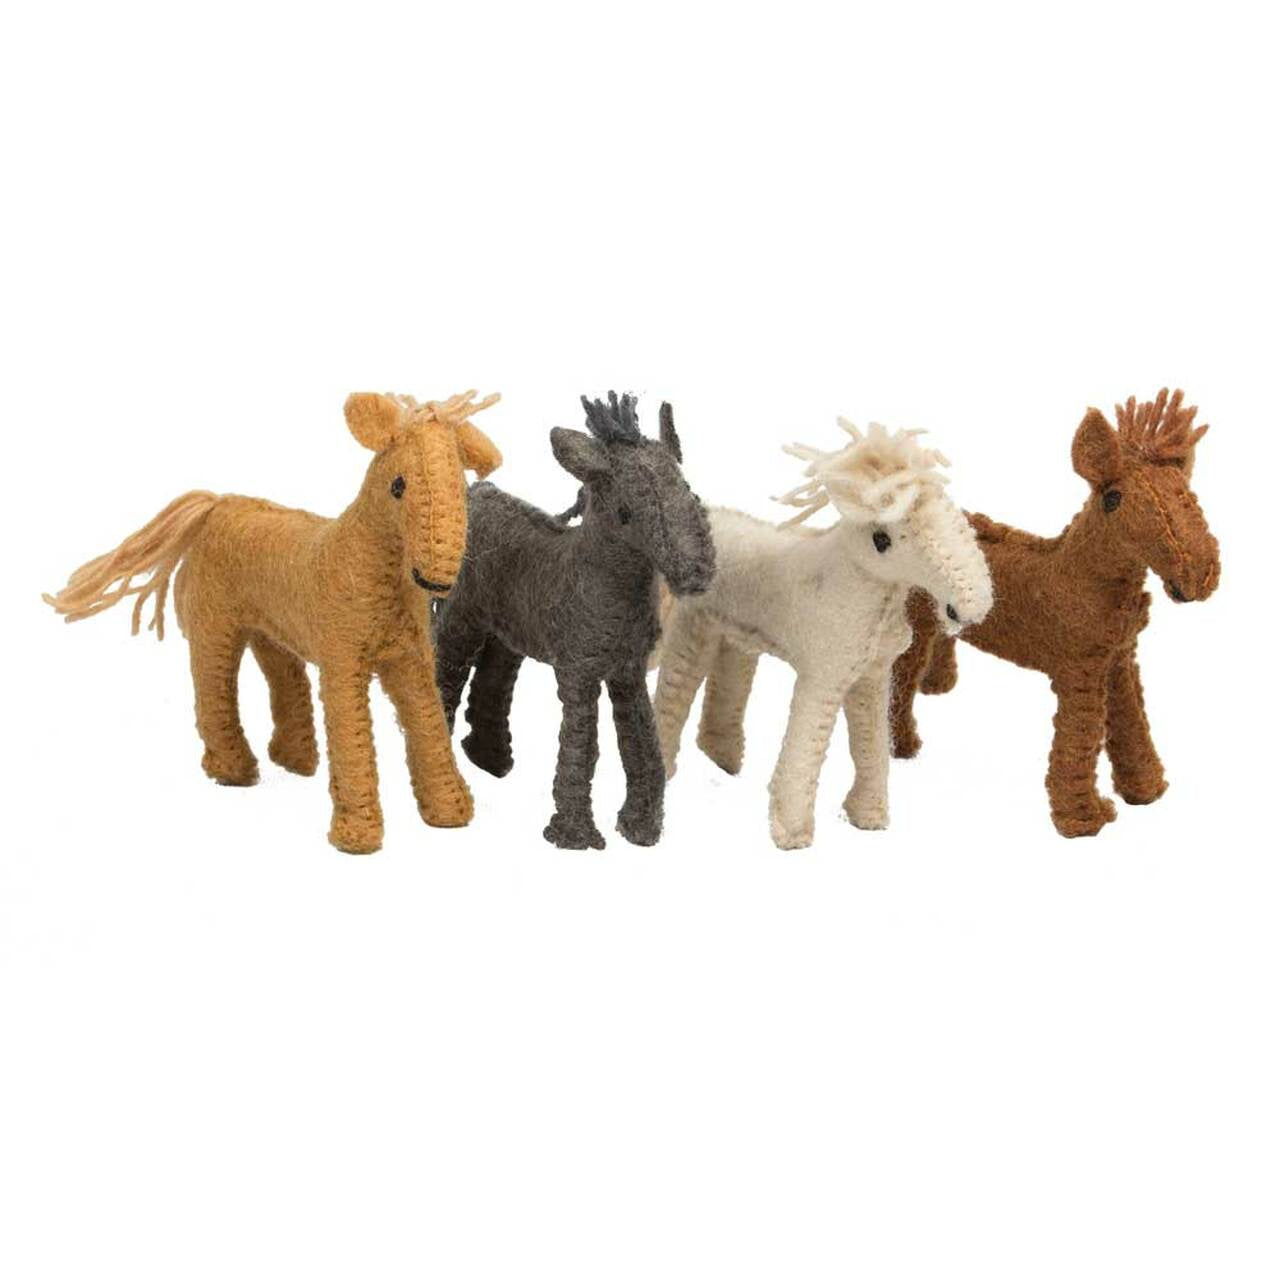 PAPOOSE - Barn Horses - Set of 4